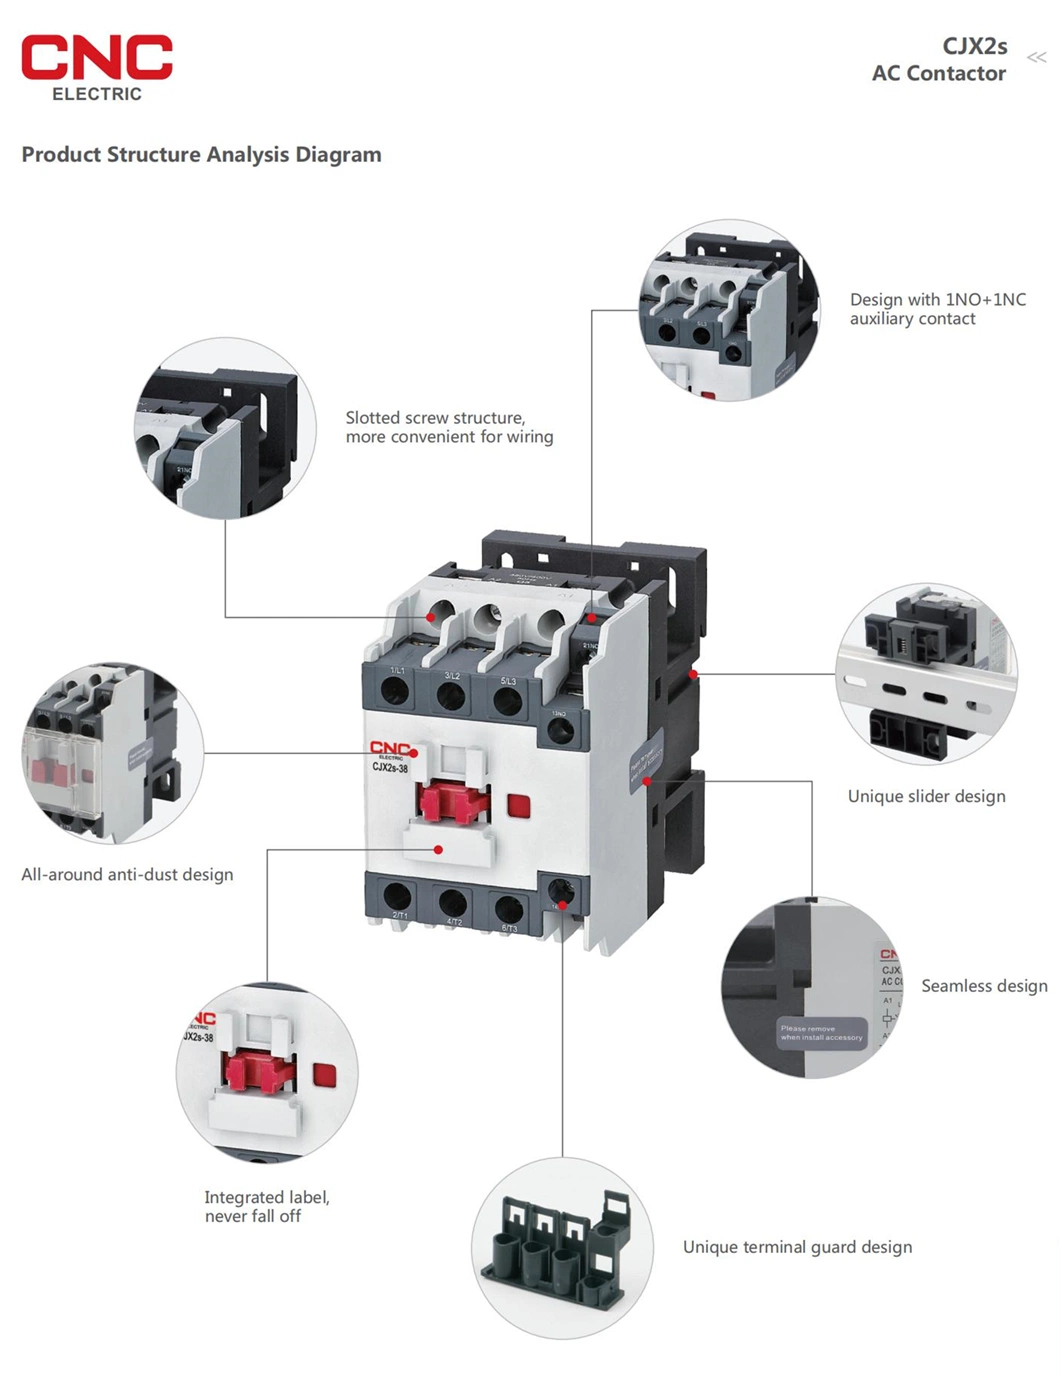 High Quality 9A - 95A AC Magnetic Surge Arrester Contactor with Good Price